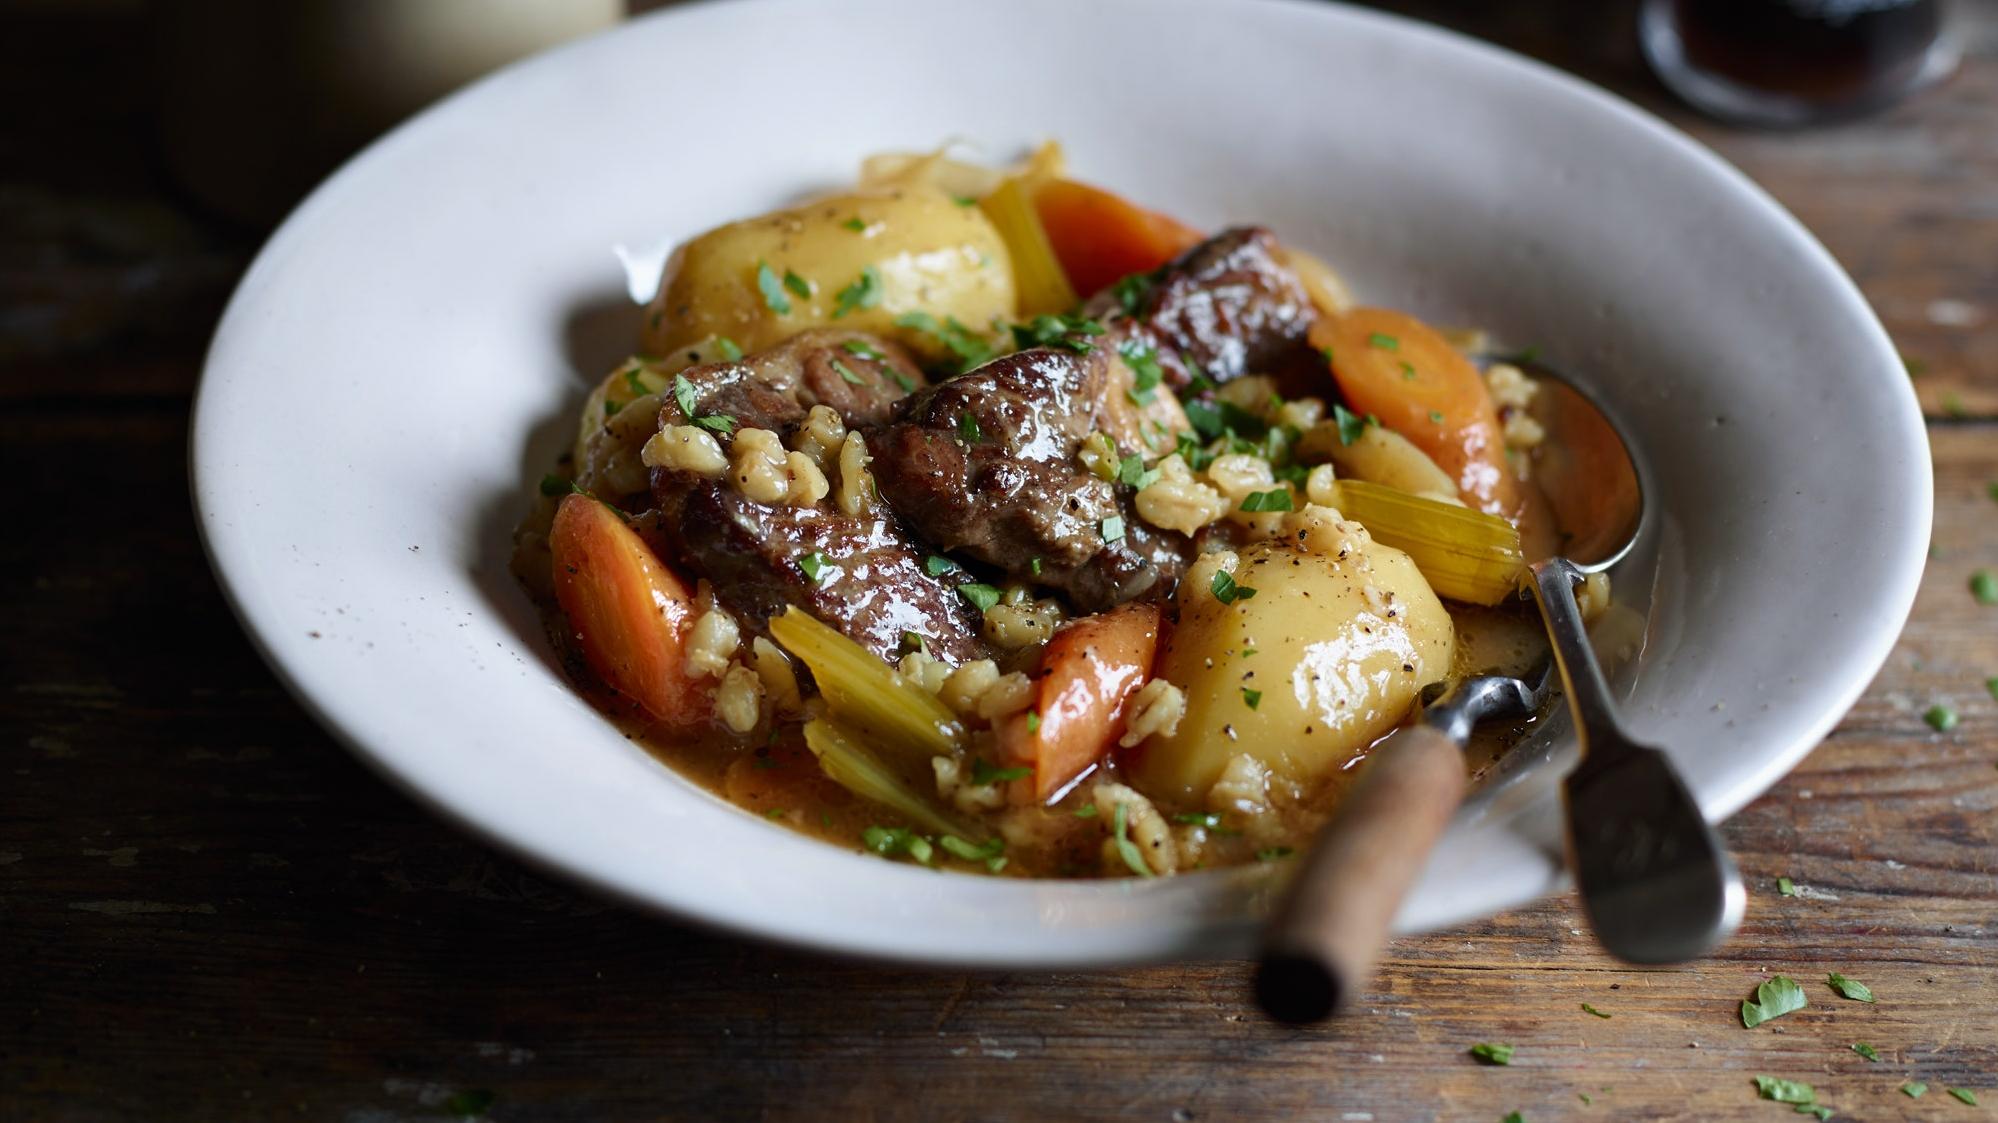  A steamy bowl of comfort: Irish stew with pearl barley.